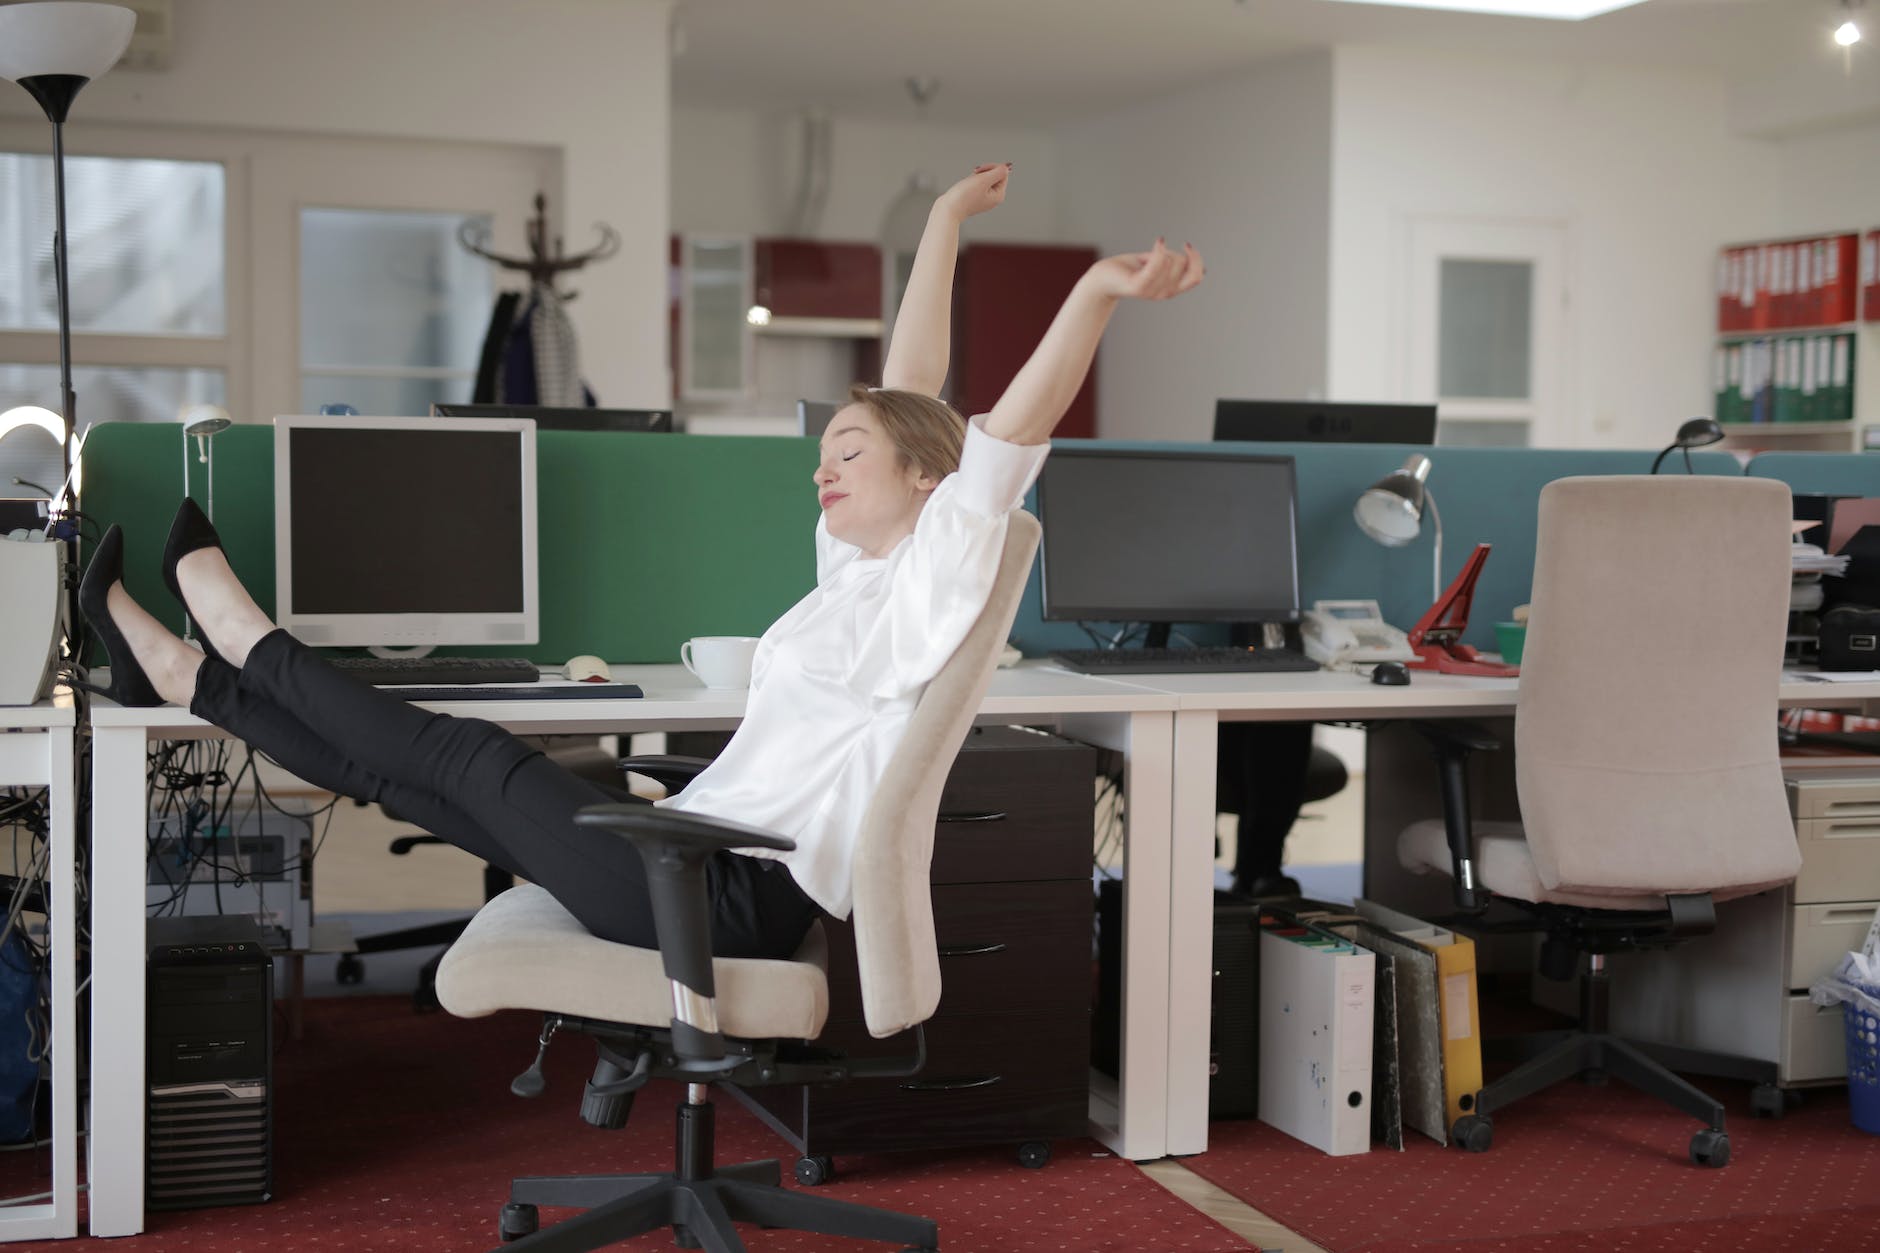 5 Tips for Improved Posture & Circulation During Your Workday